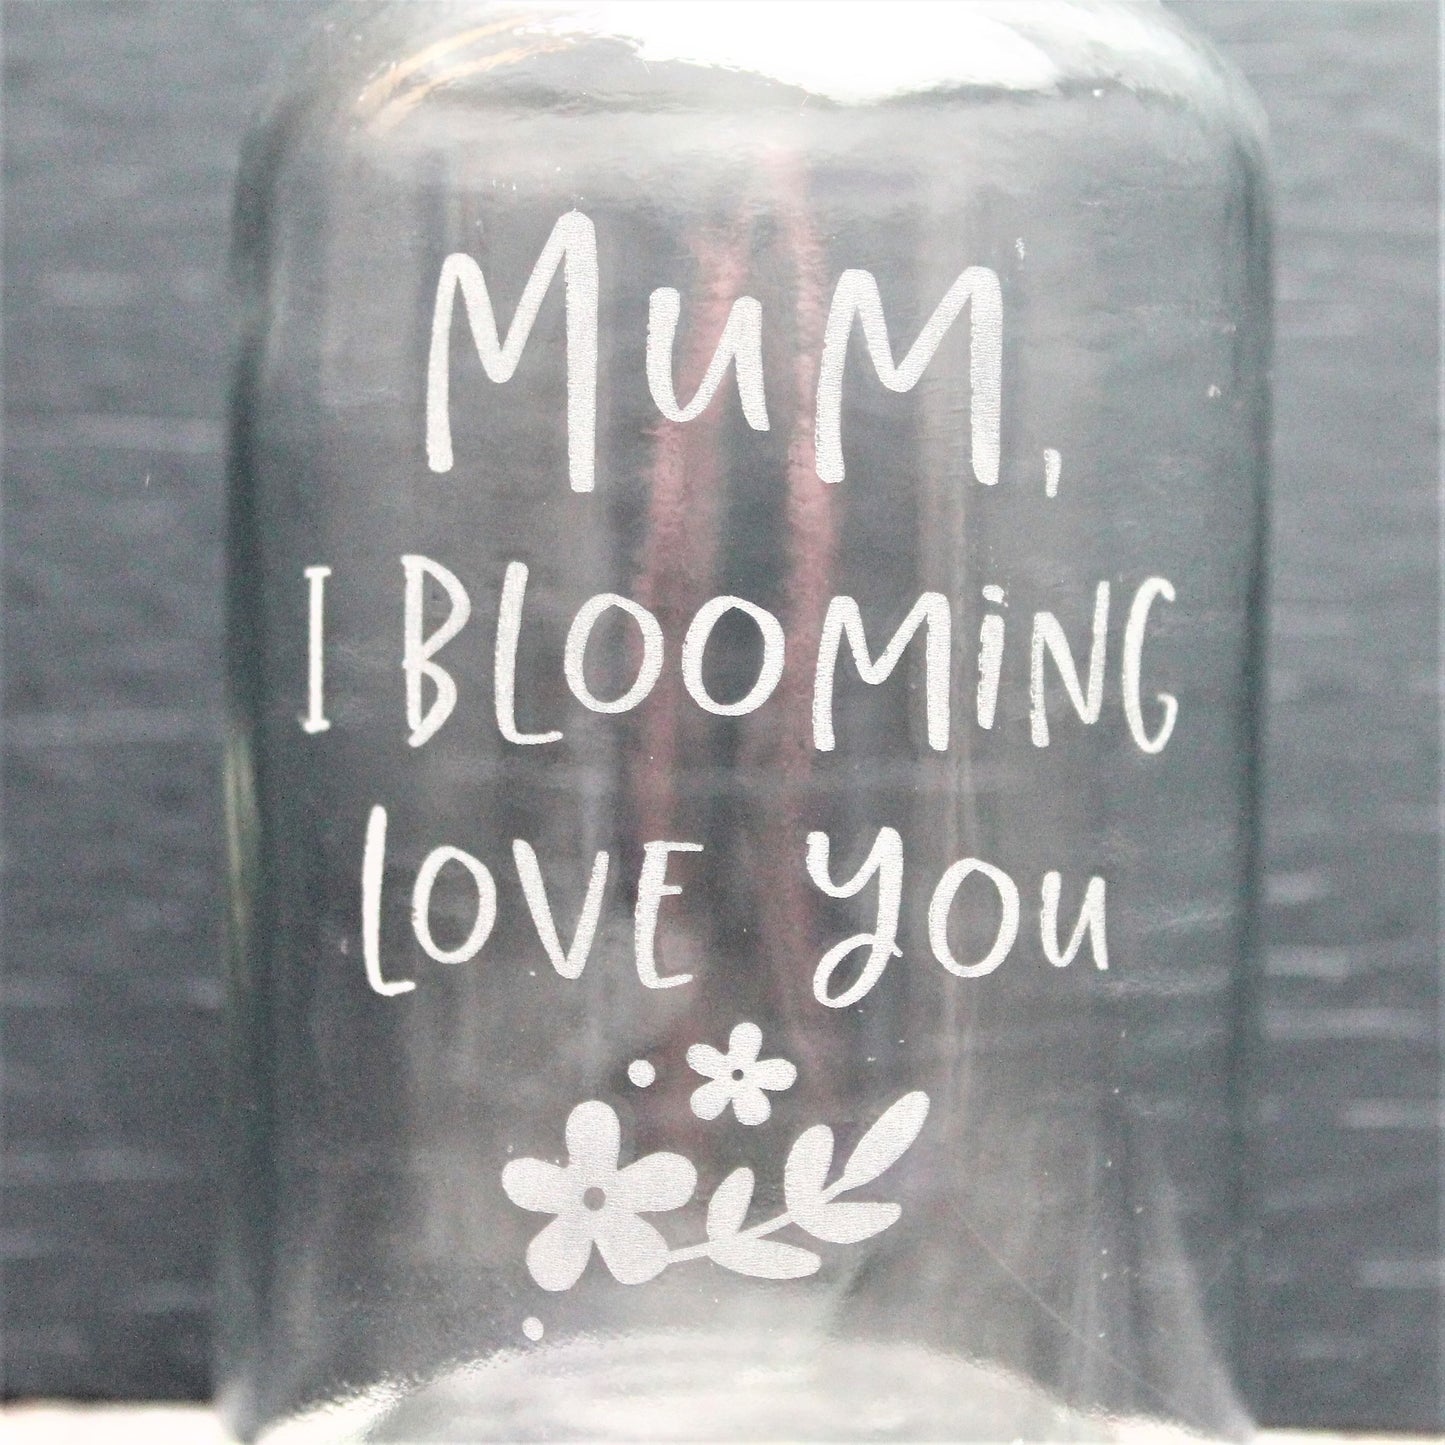 Engraved floral vase with mothers day quote 